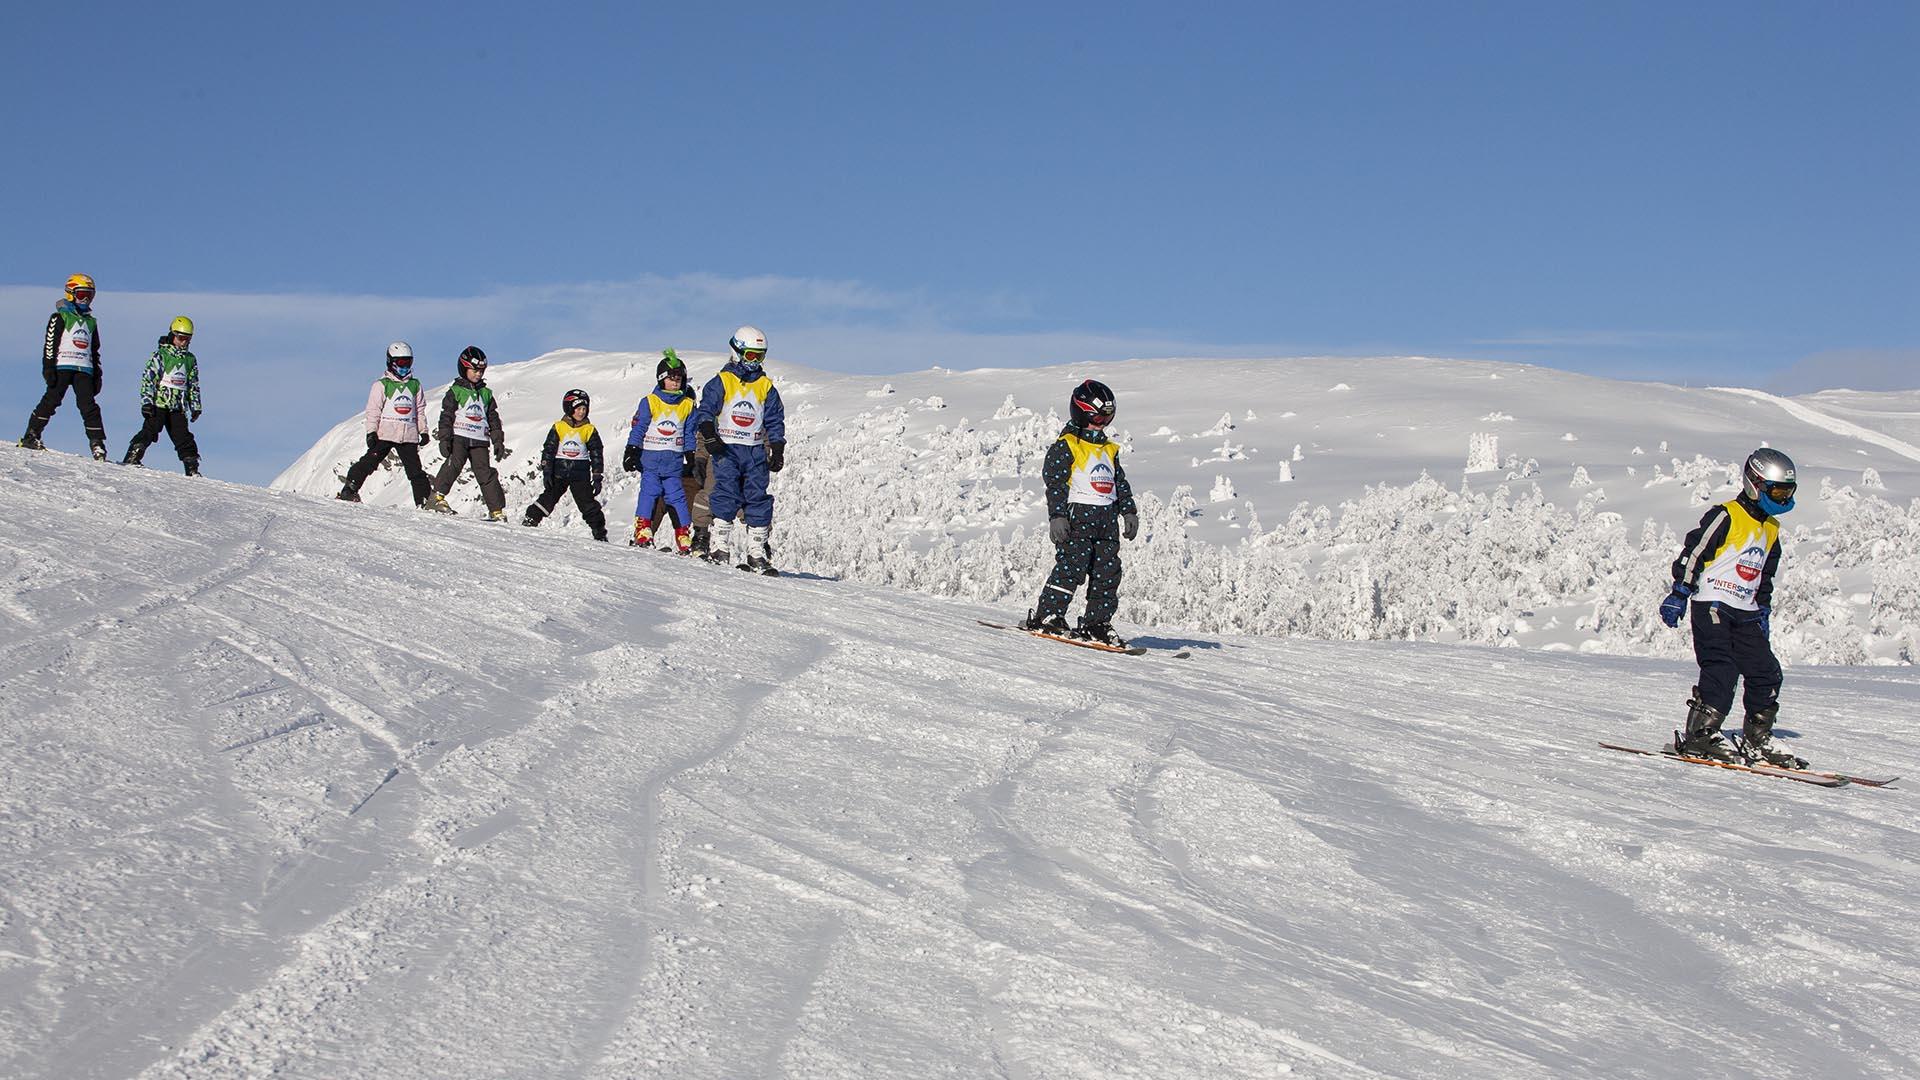 A group of children is following the skiing instructor downhill in the slope